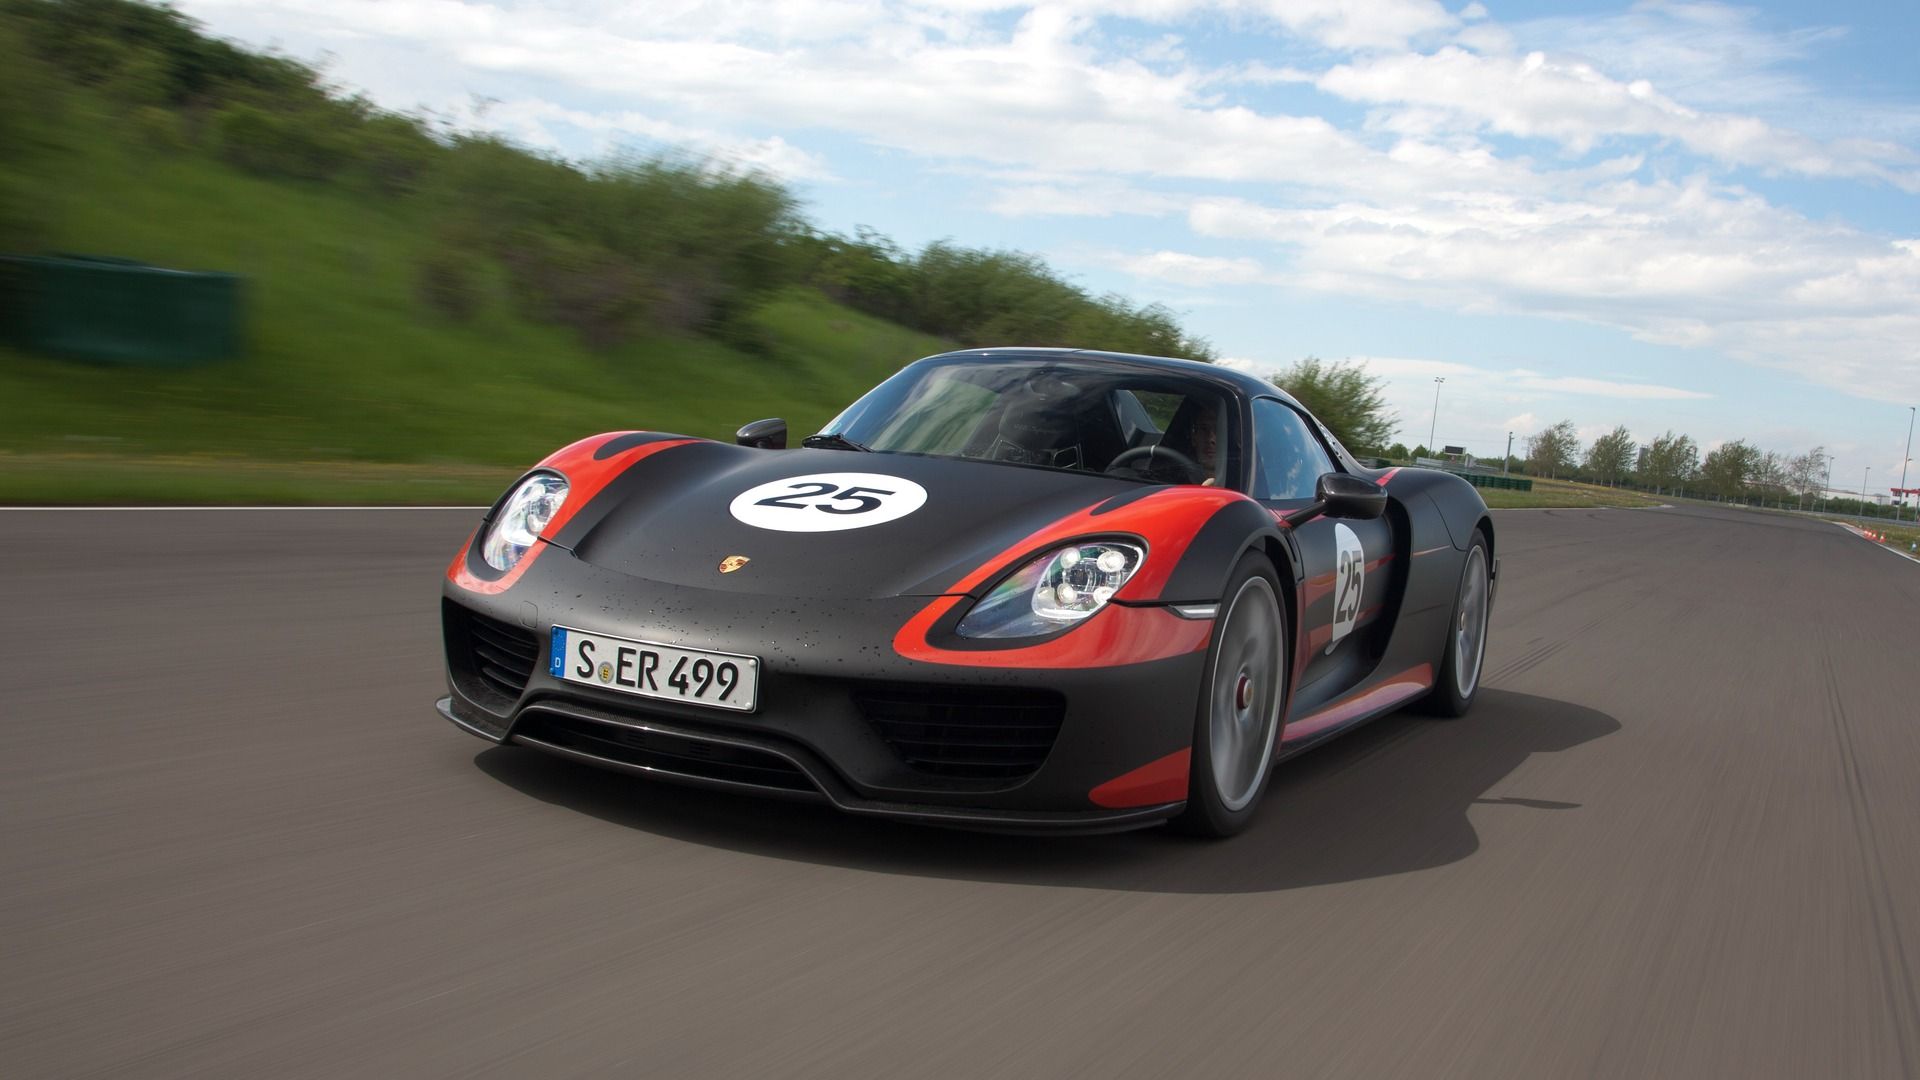 The Porsche 918 Spyder is the ultimate driving machine